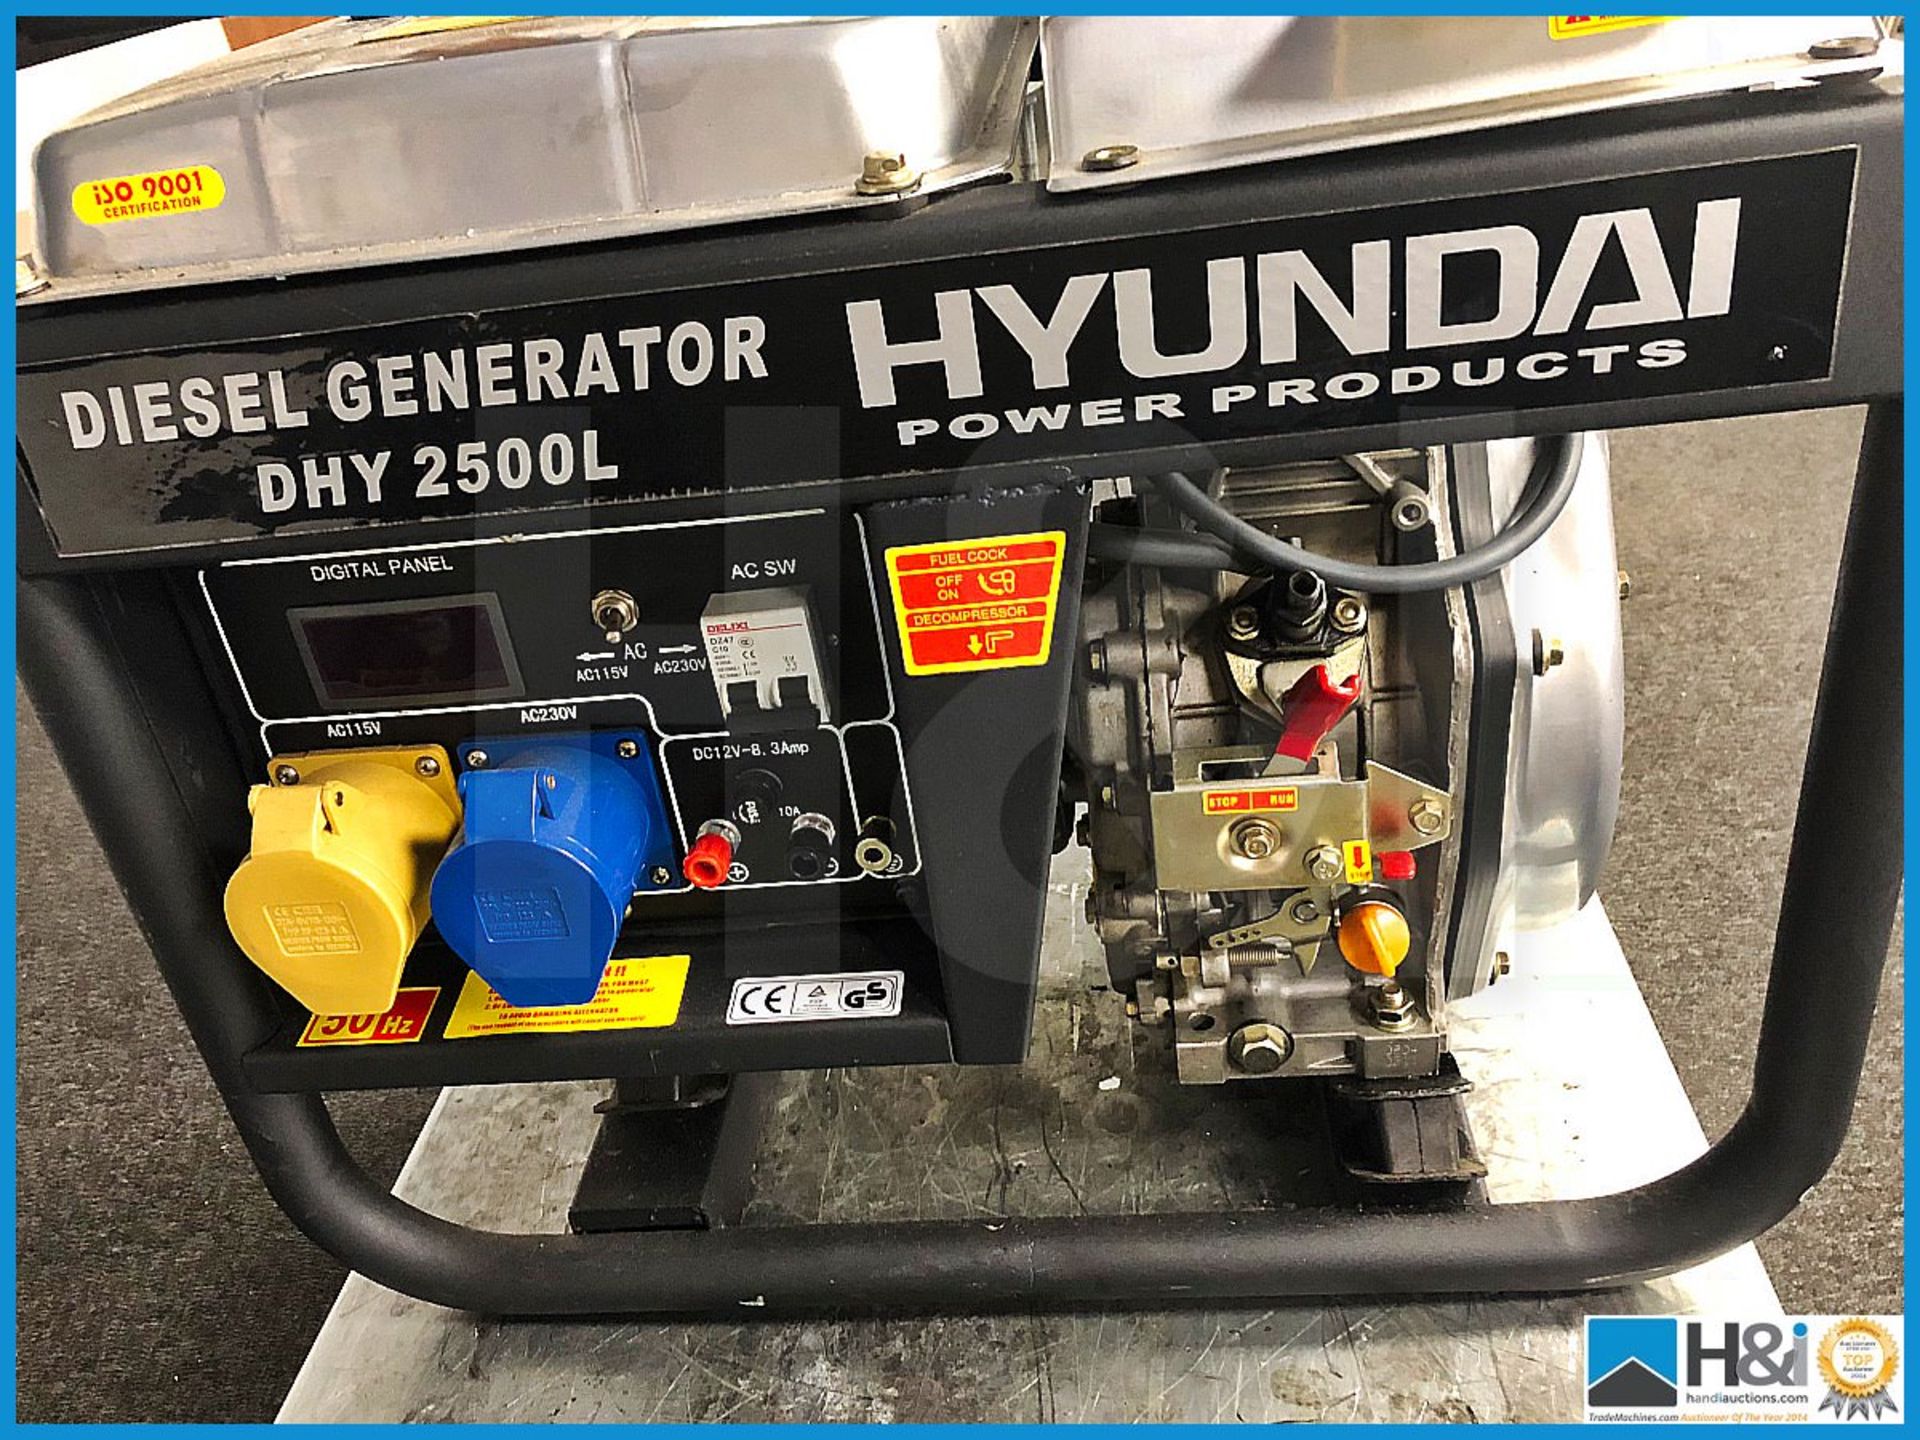 Hyundai DHY2500L diesel generator 3000w. 110v and 240v. Advised missing pull start and possibly othe - Image 2 of 7